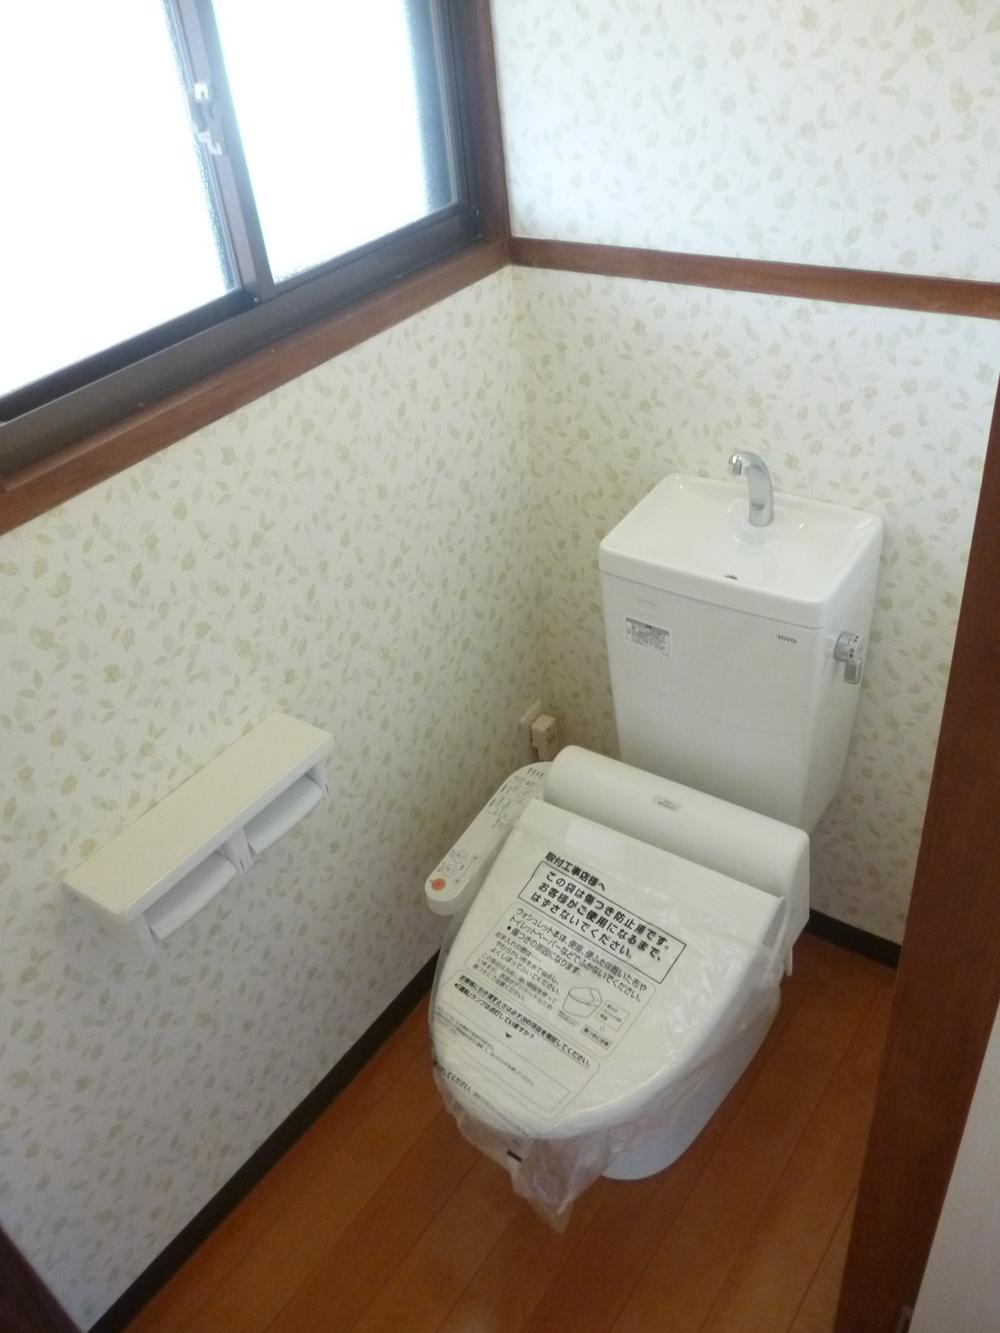 Toilet. WC of Washlet. In the toilet space using the cute wallpaper, Healed likely